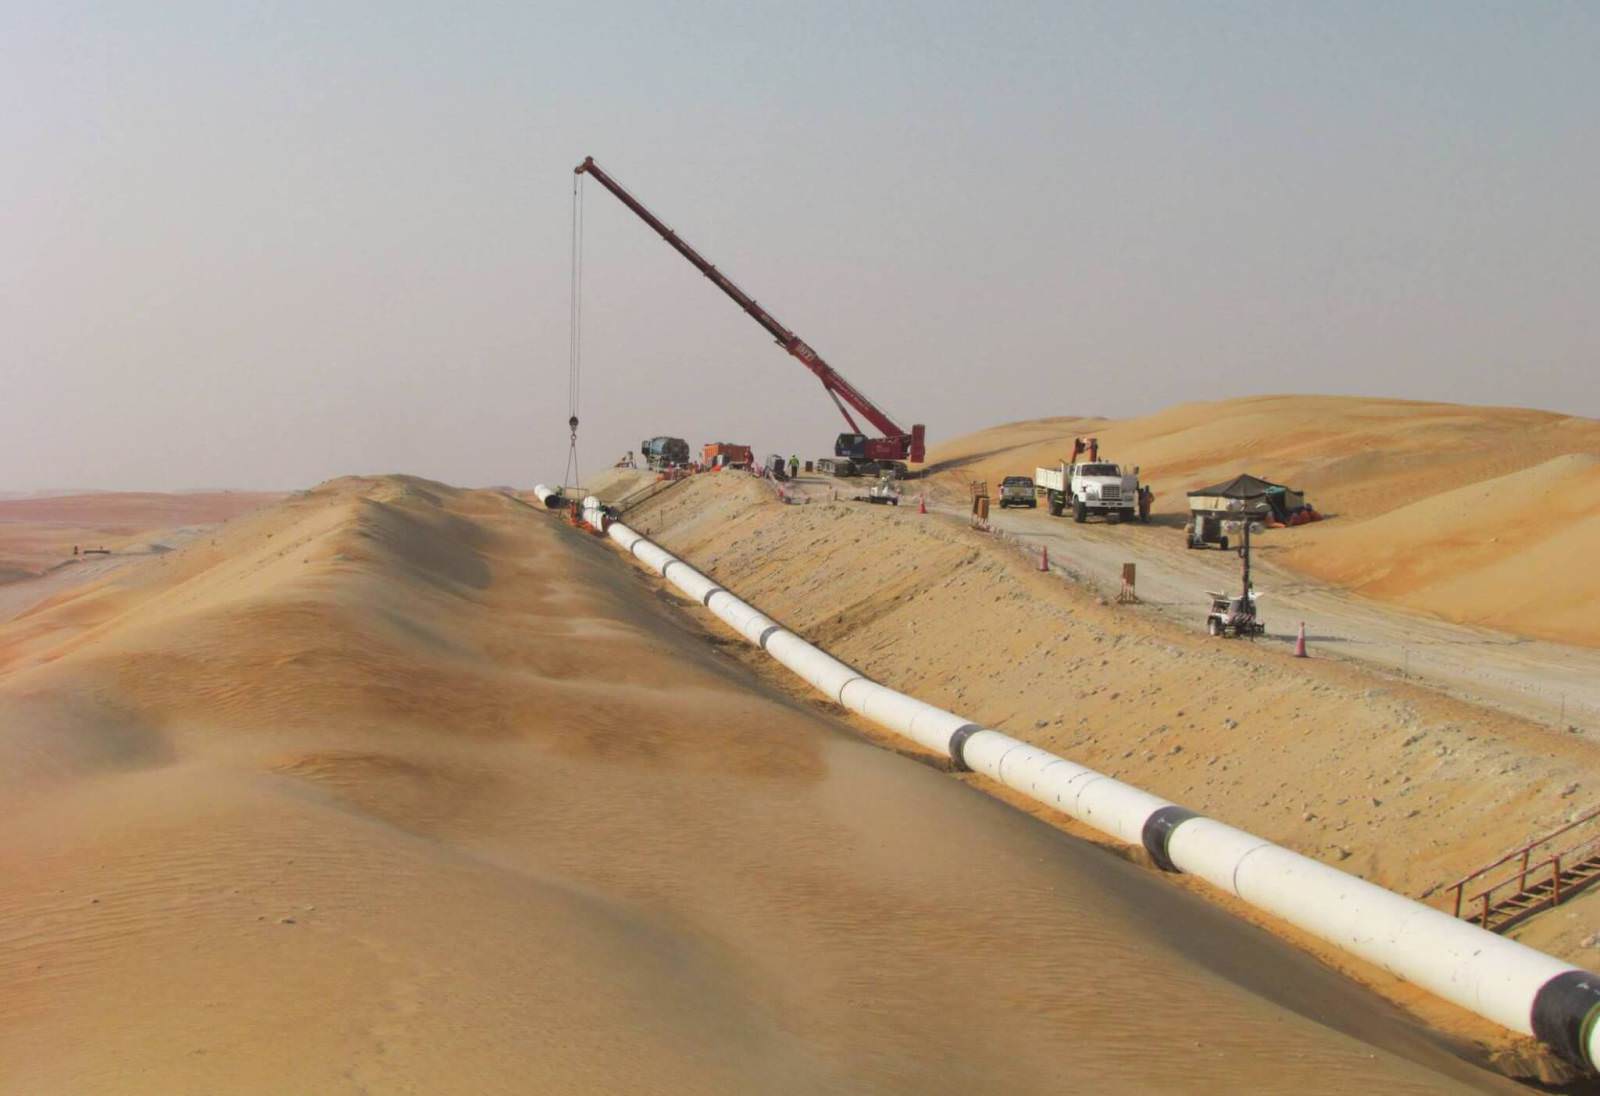 The UAE Has ​Built the ​World’s ​Largest ​Desalinated ​Water ​Reserve - Under a Desert